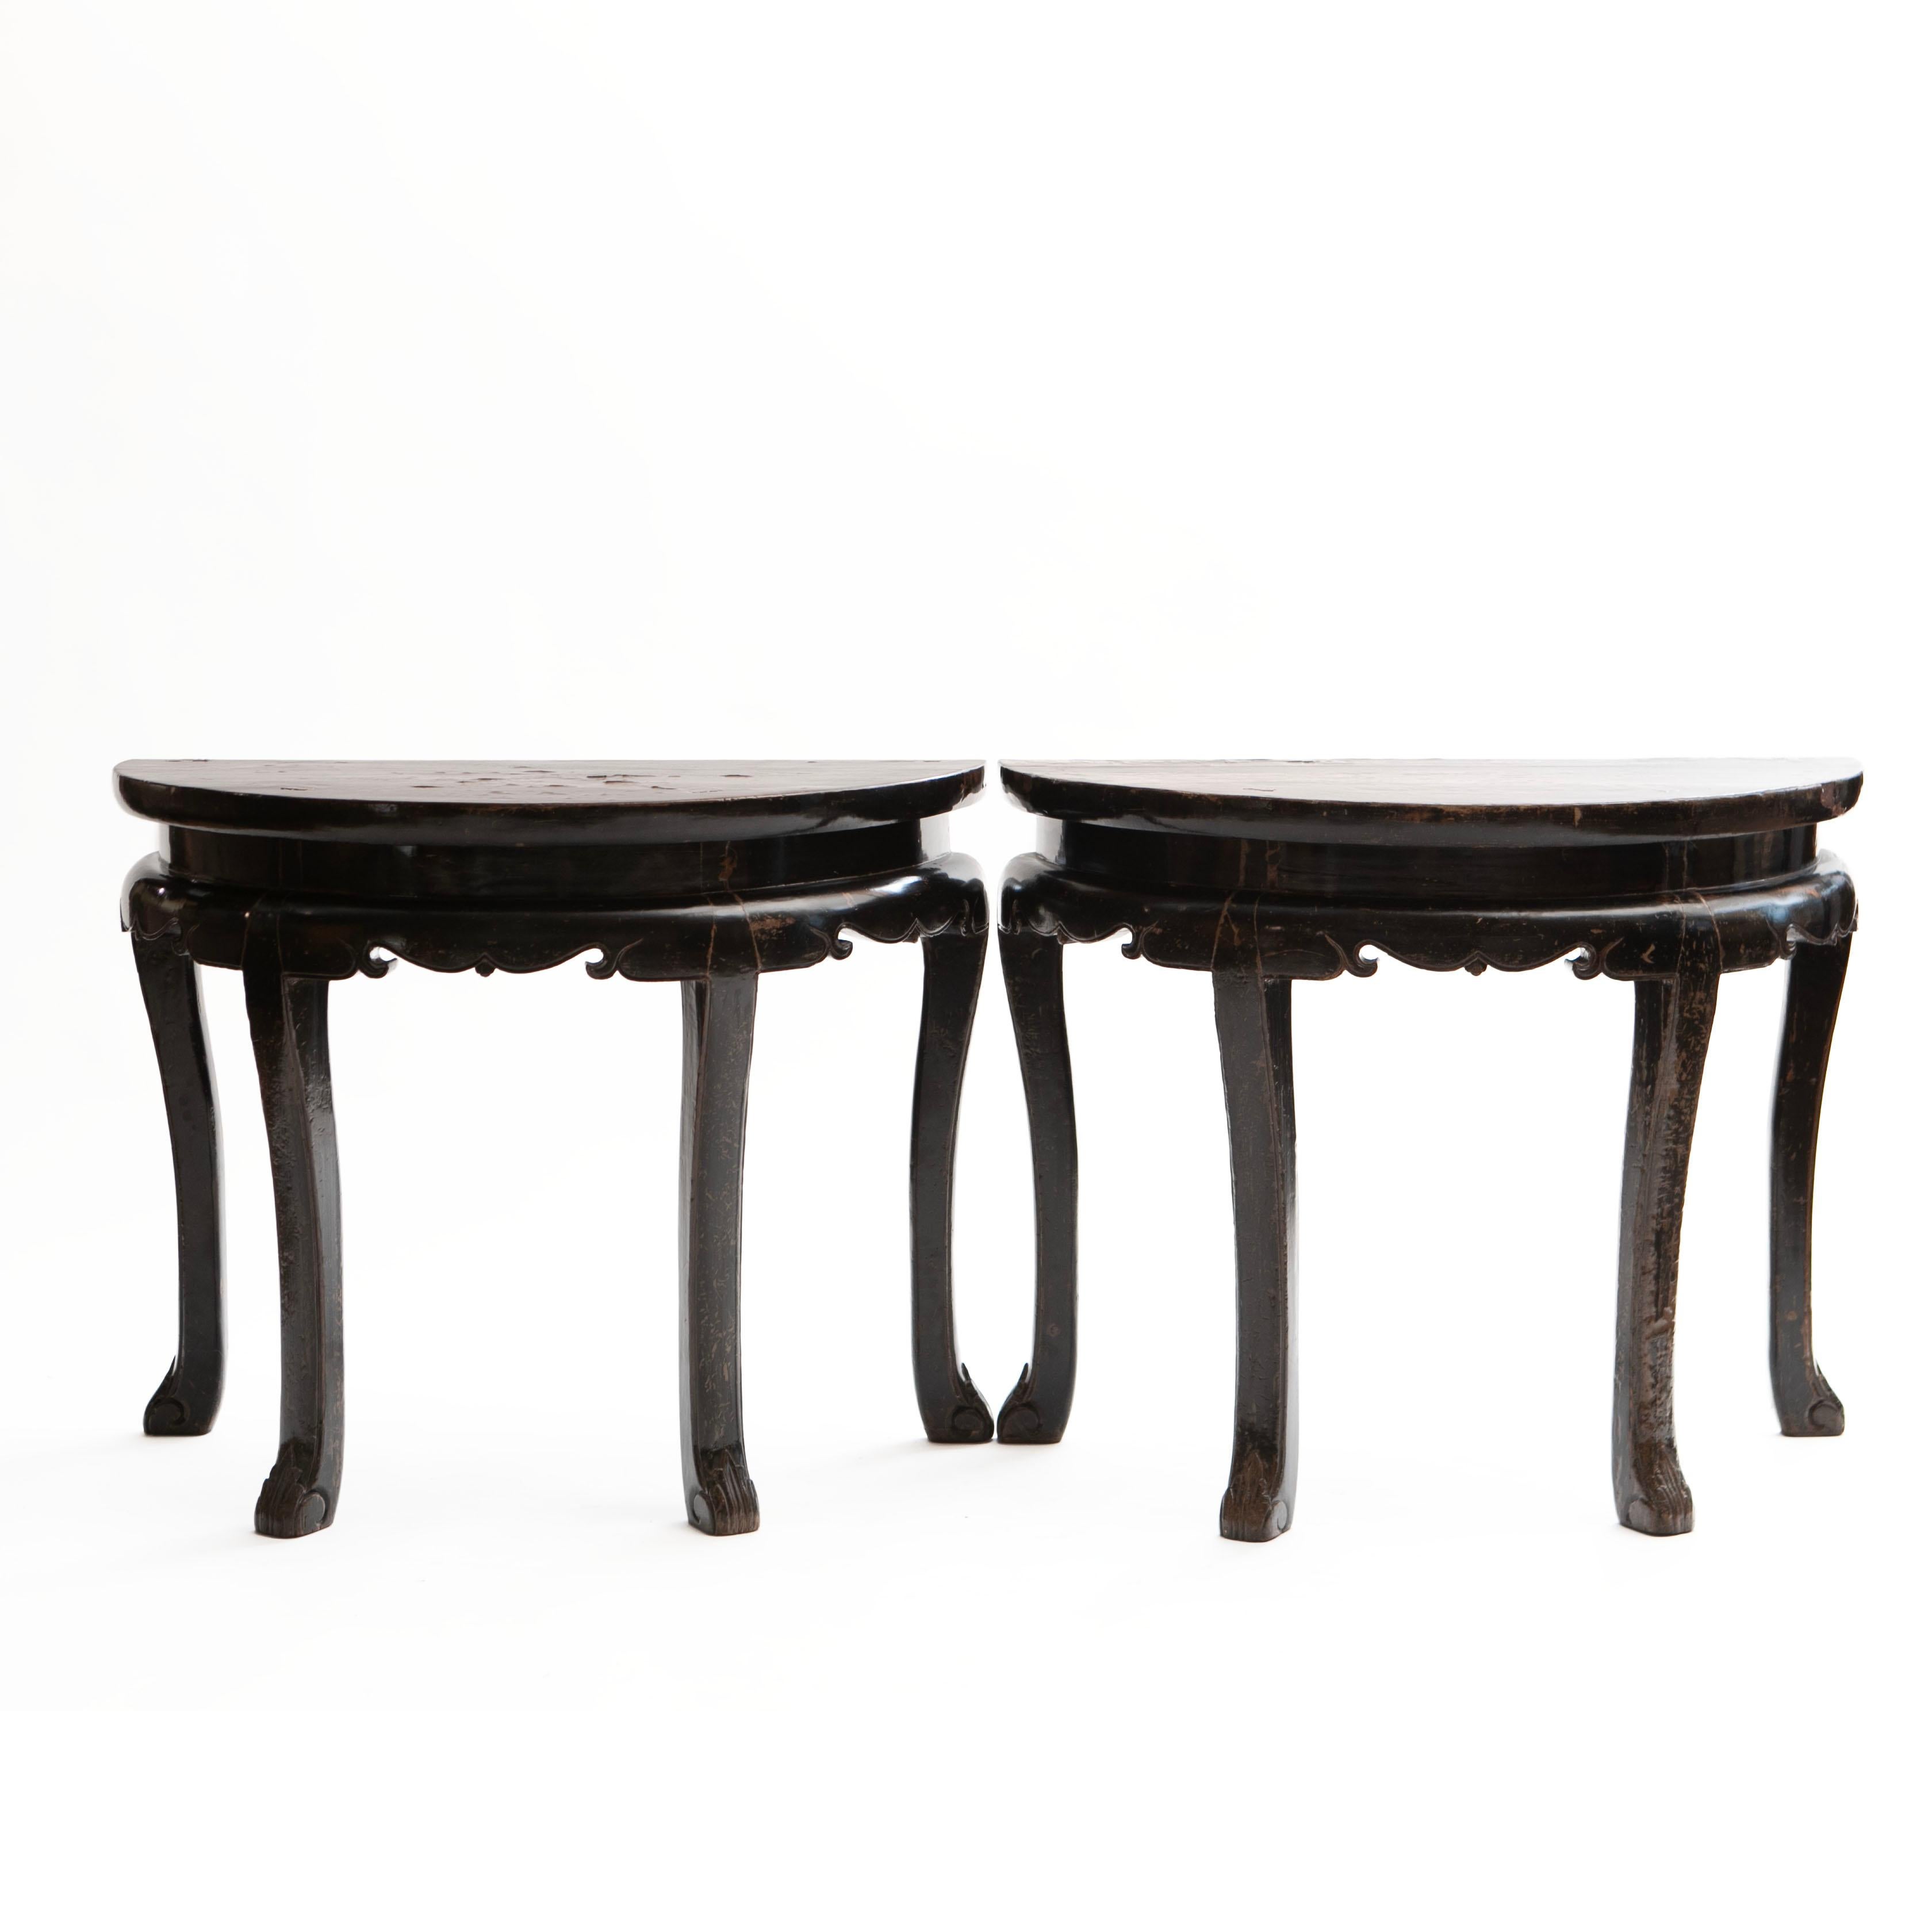 Center Table ore A pair of decorative half-round console tables, also known as Demilune tables.
These tables can be used individually or combined as a circular center table if placed together. 
Crafted in walnut with black lacquer and natural